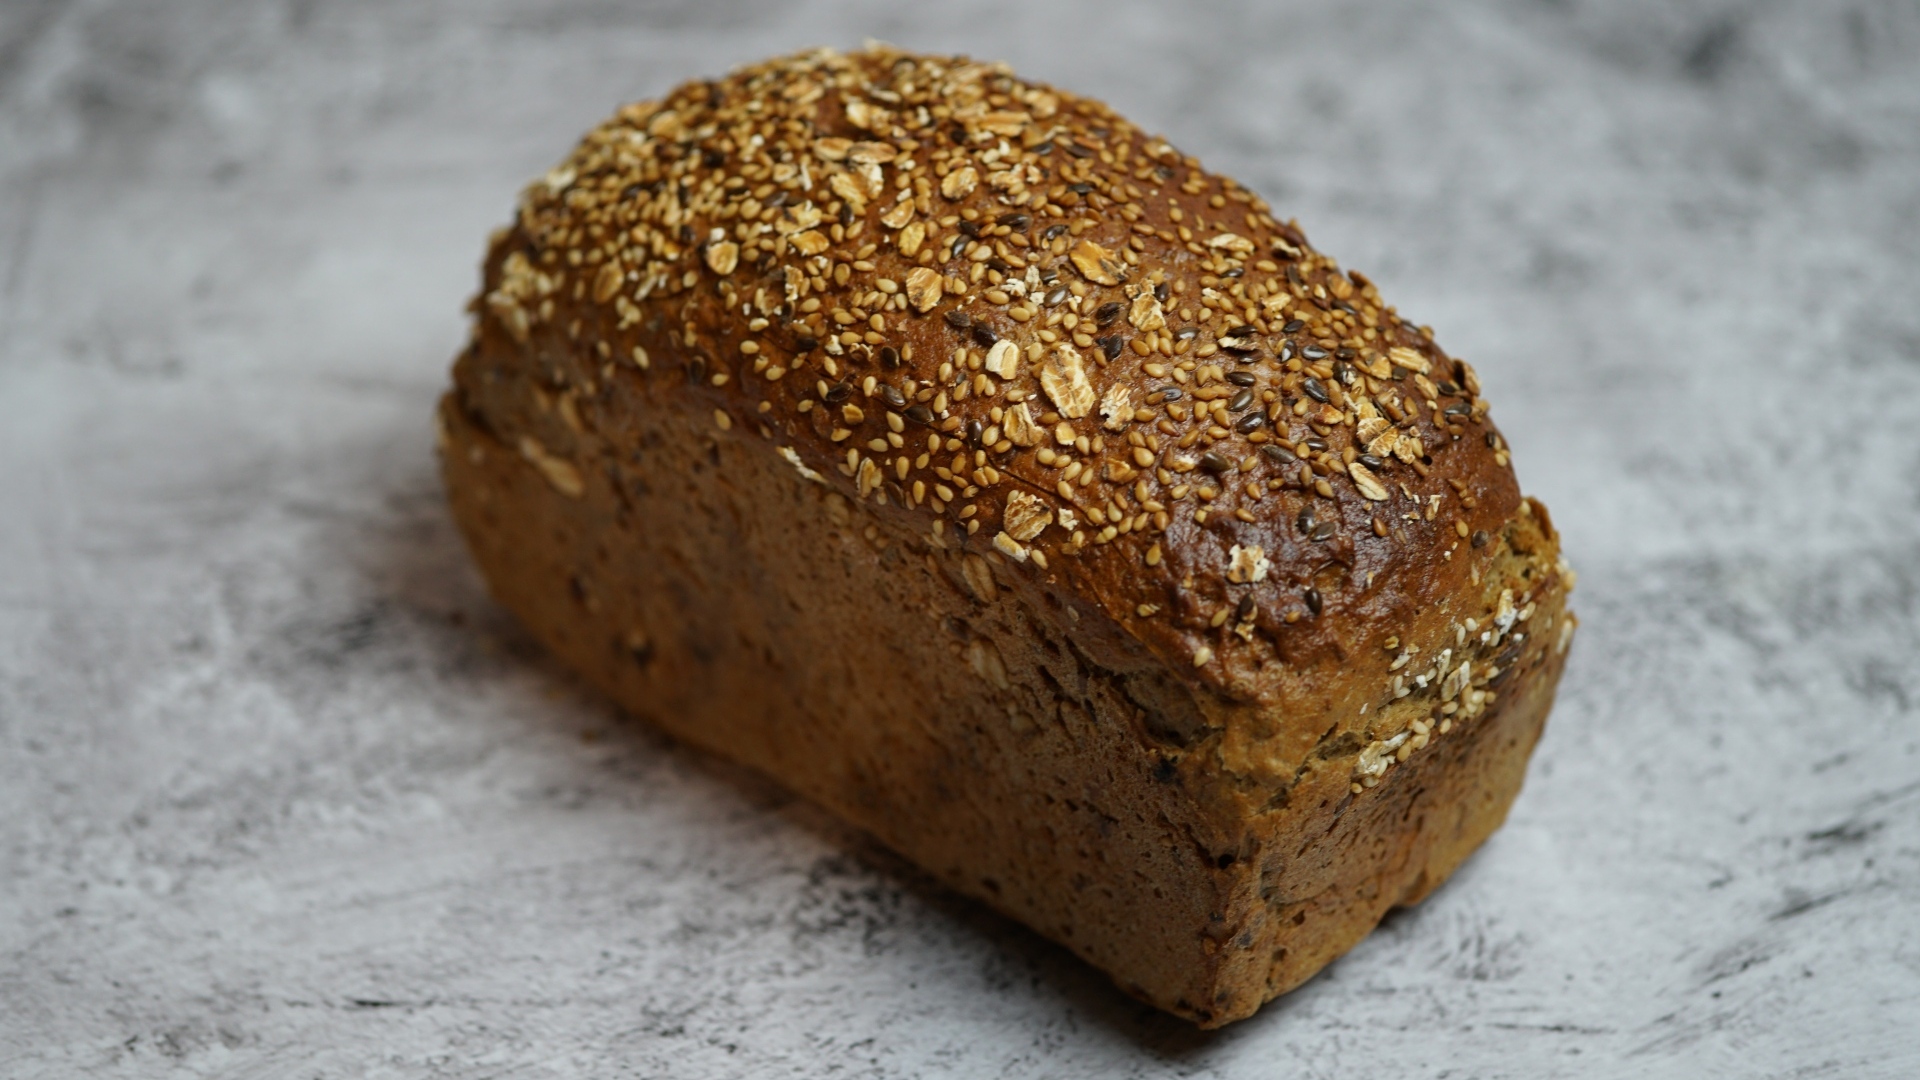 Loaf of bread with seeds